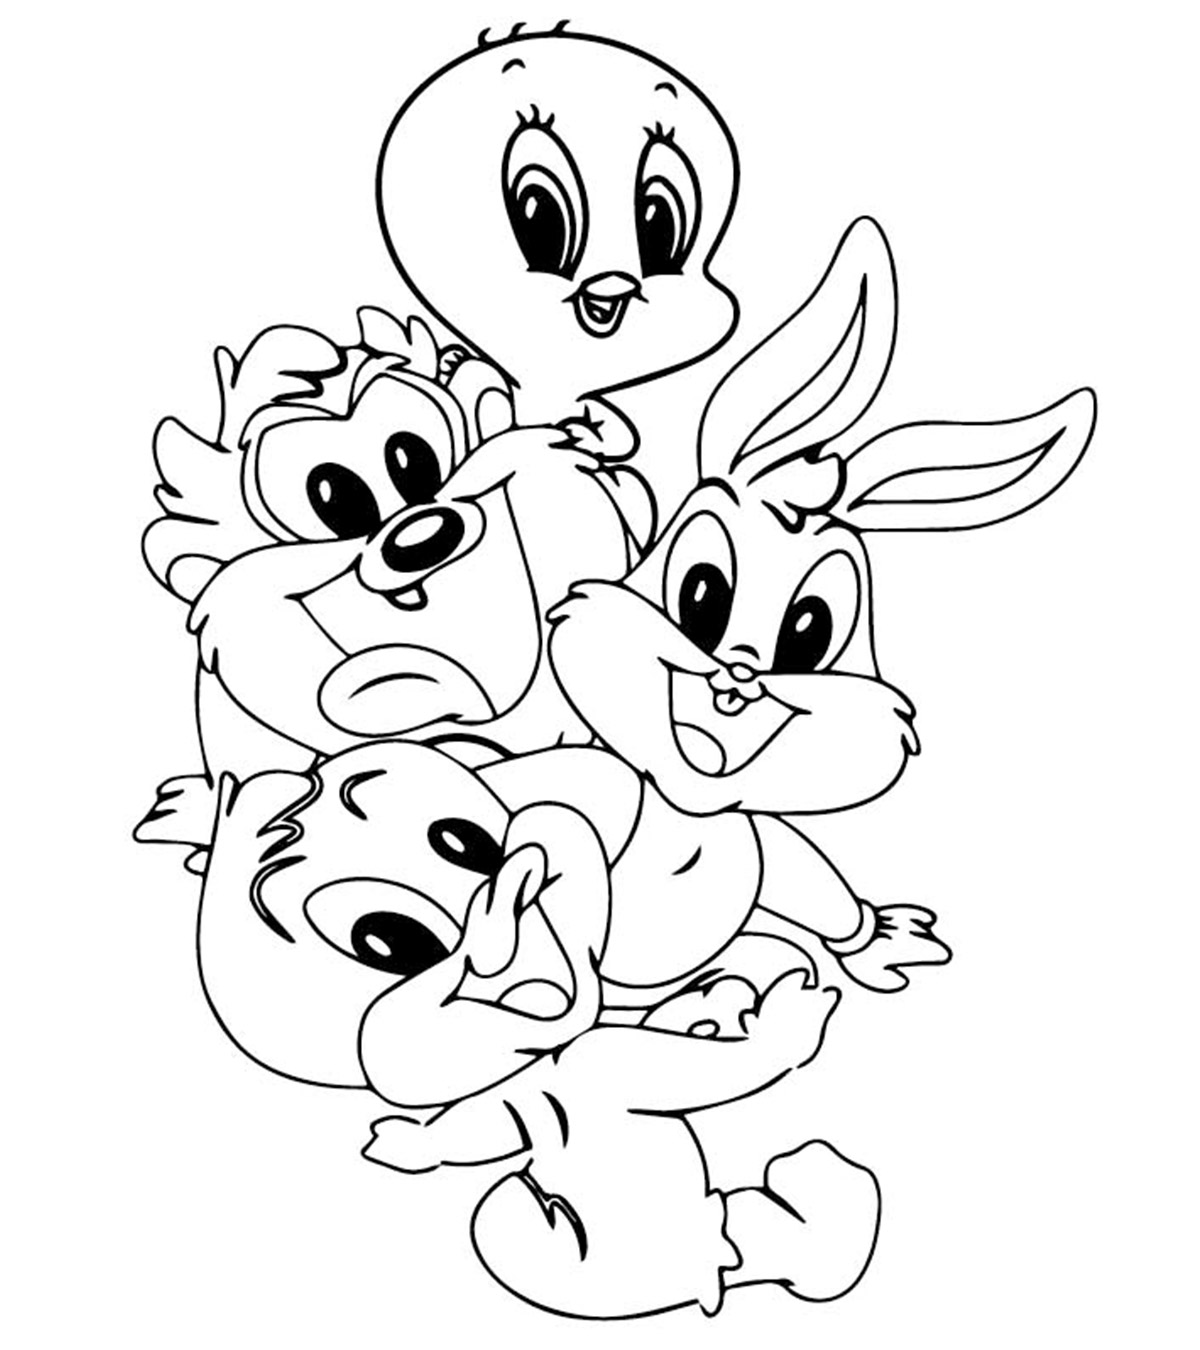 scary tweety bird coloring pages